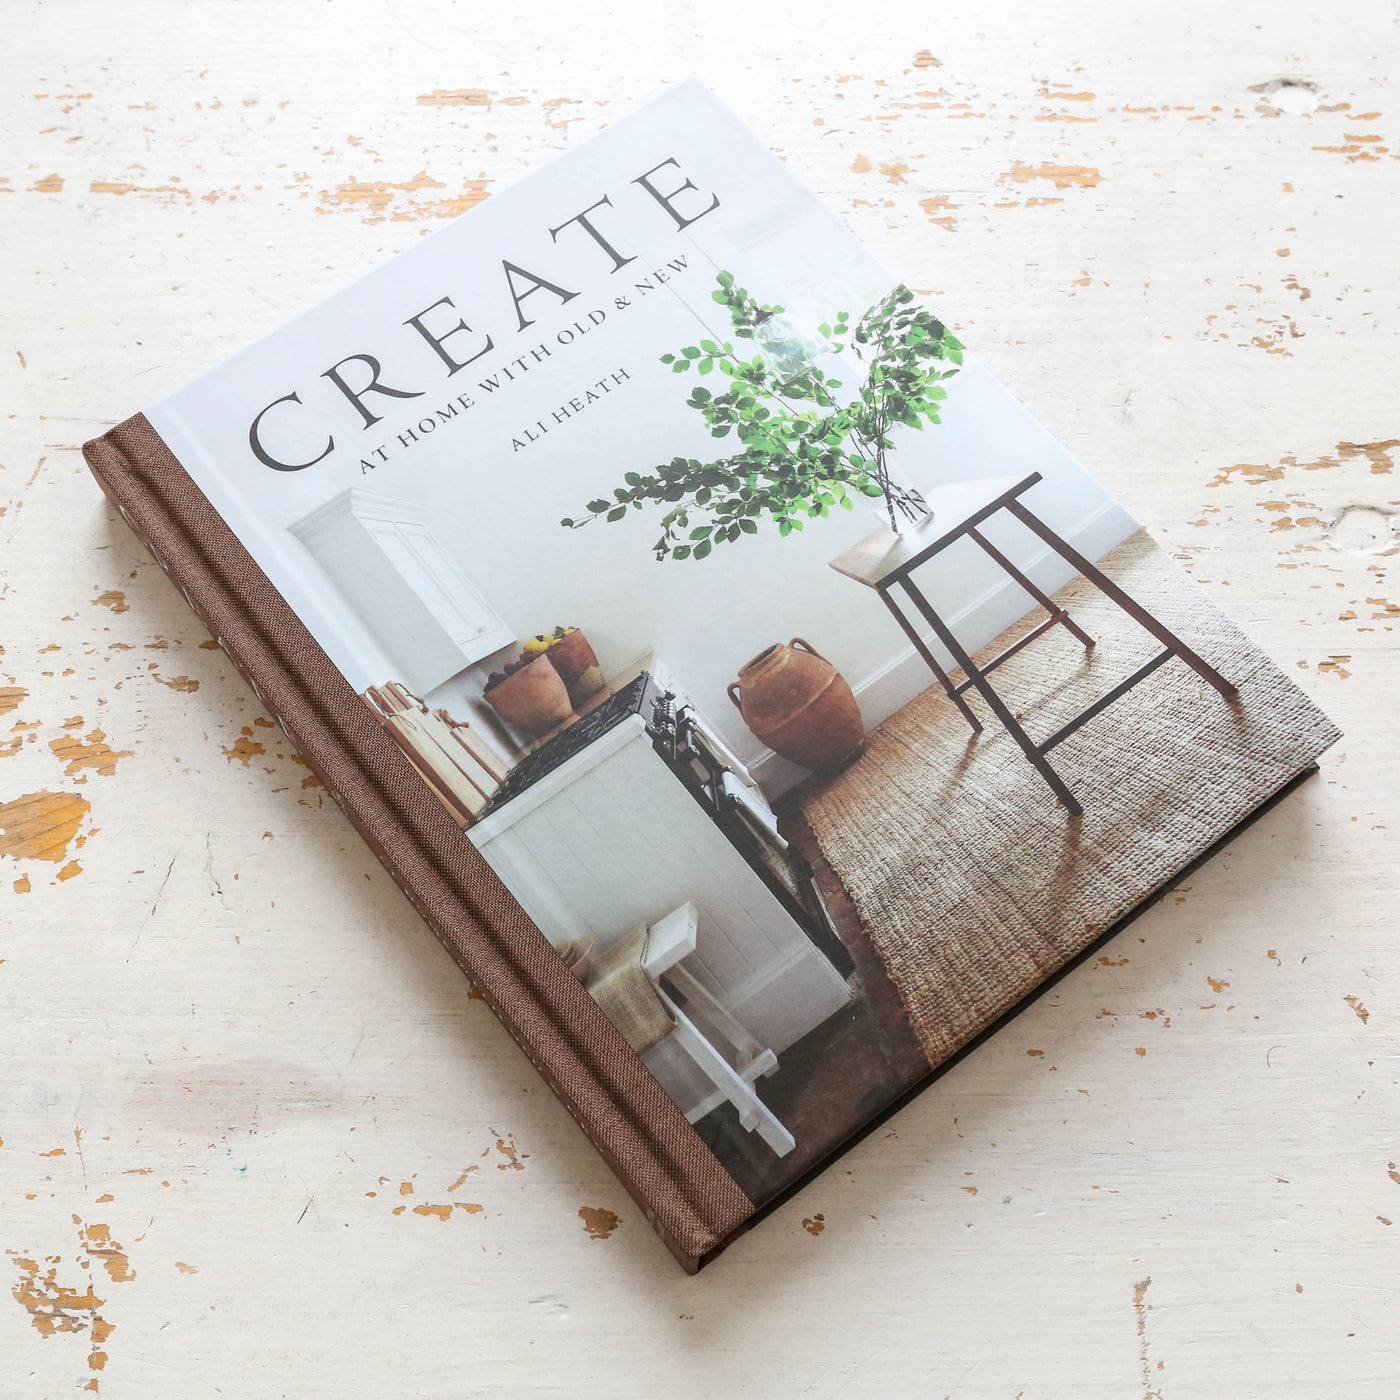 Create : At Home with Old & New